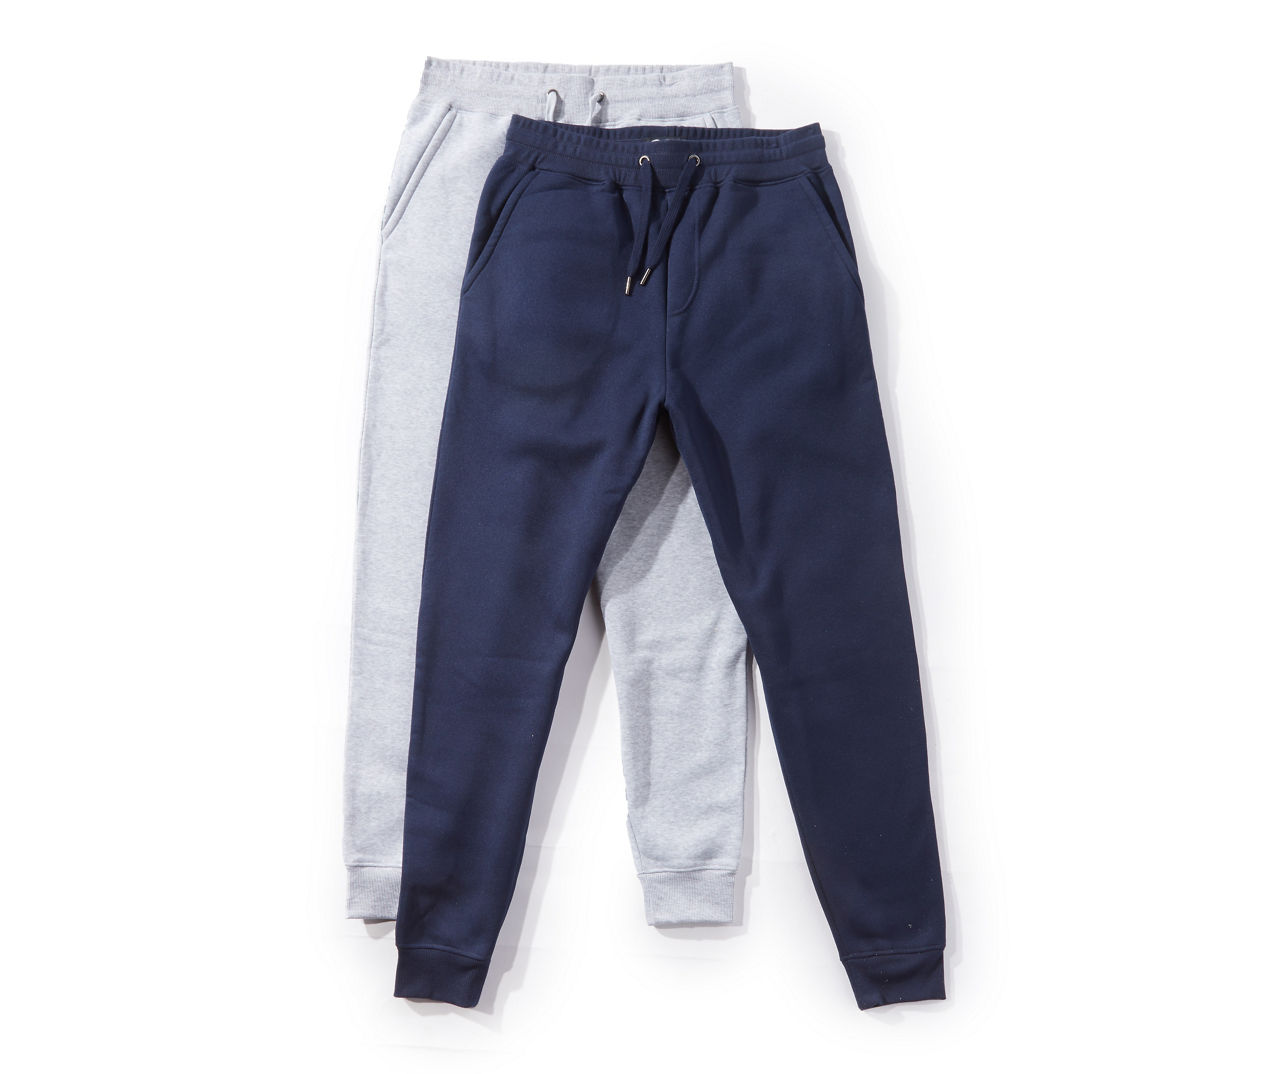 Men's Size X-Large Navy & Gray Heather Jogger, 2-Pack